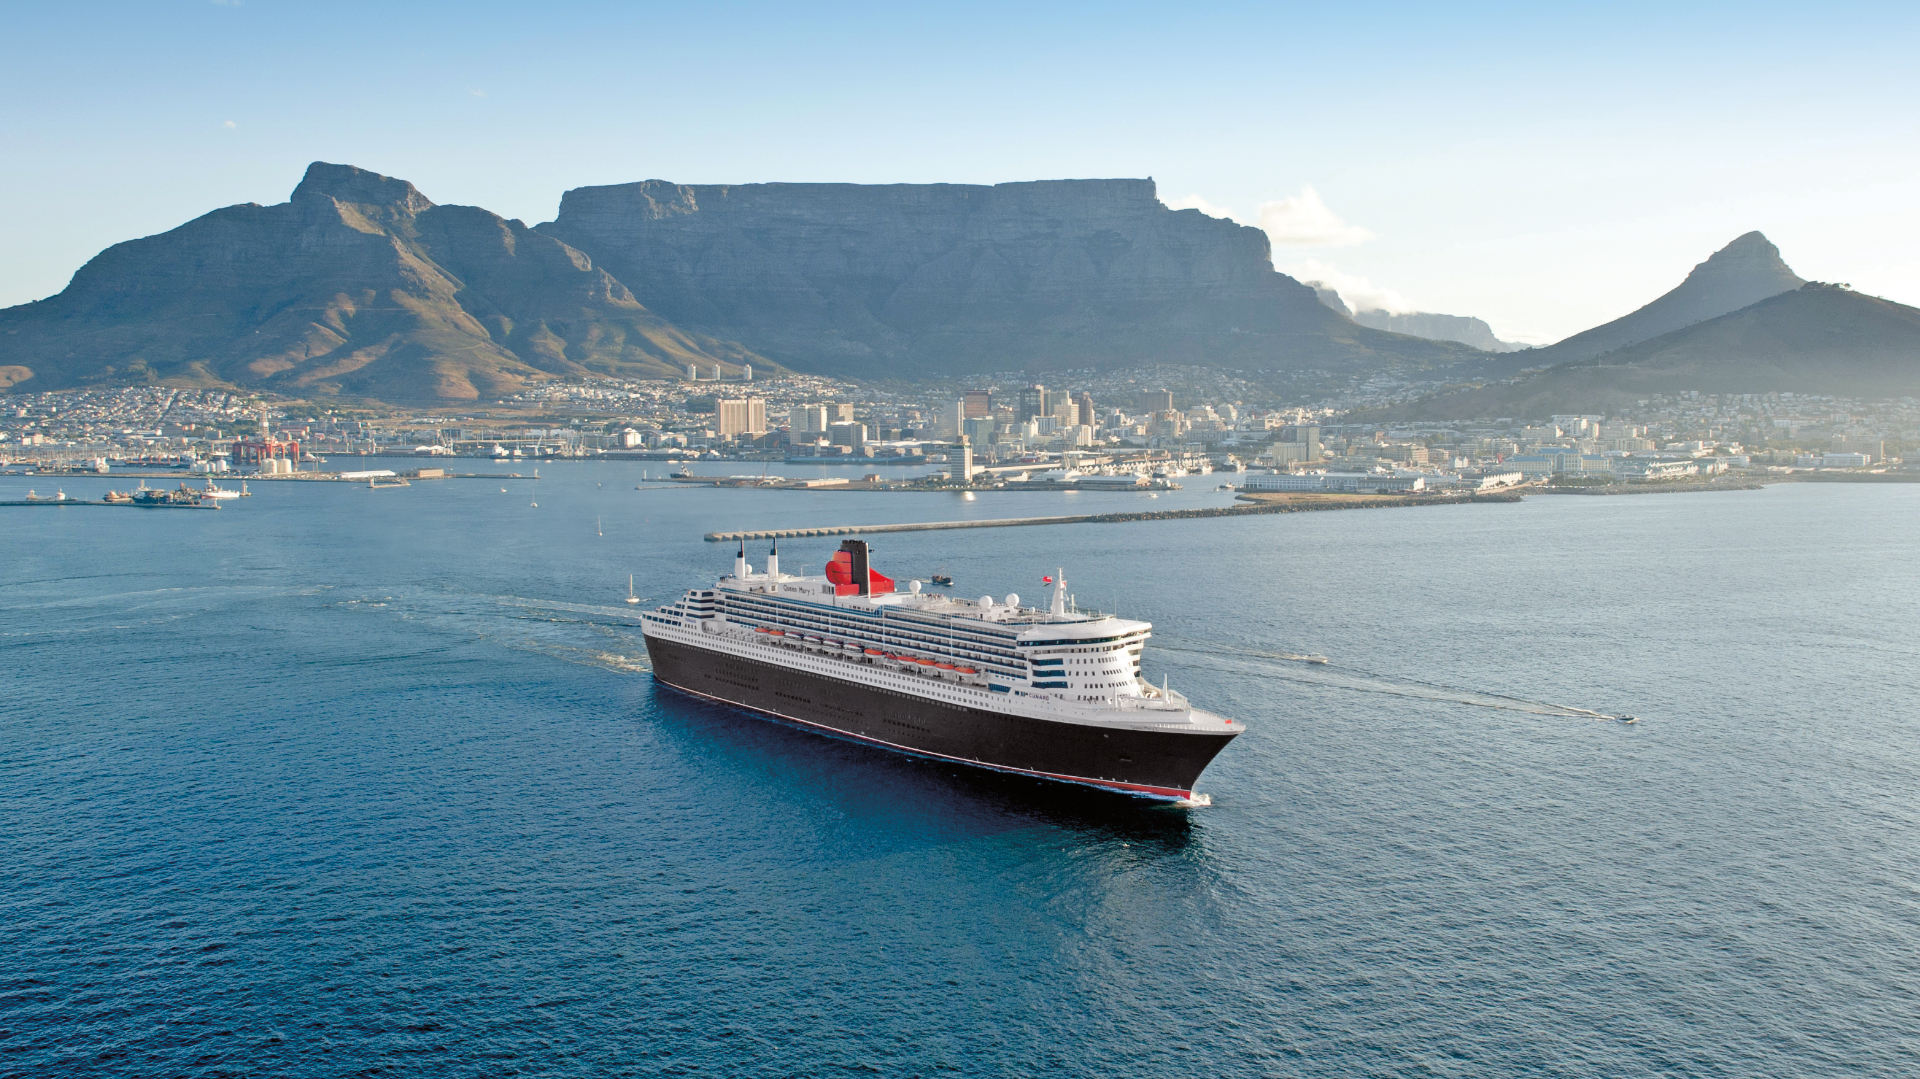 Queen Mary 2 in Cape Town